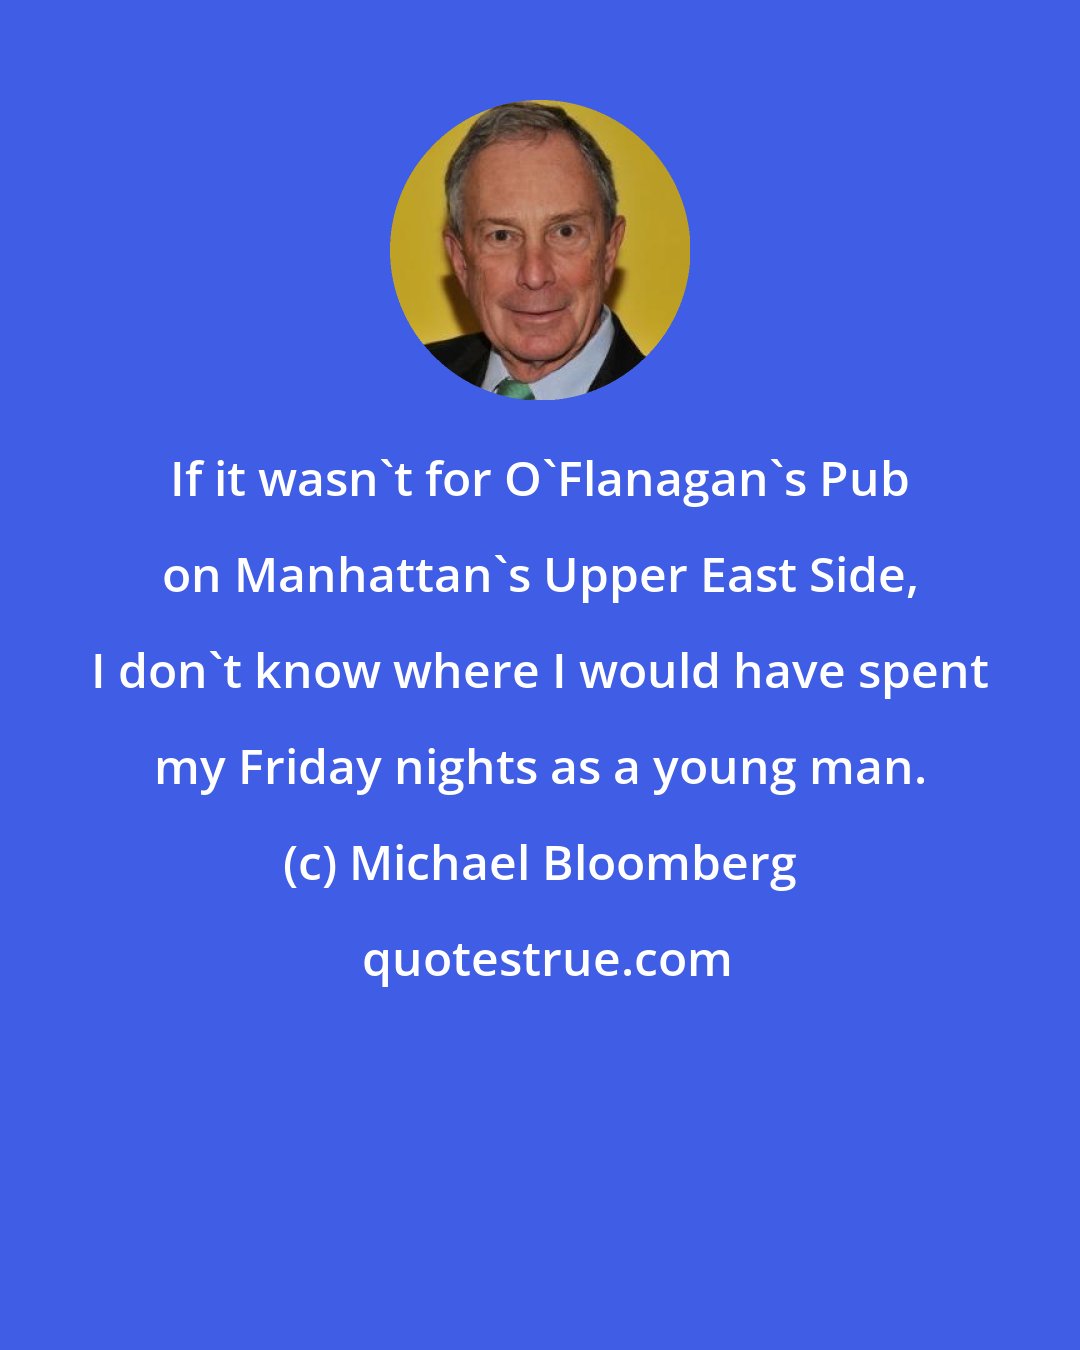 Michael Bloomberg: If it wasn't for O'Flanagan's Pub on Manhattan's Upper East Side, I don't know where I would have spent my Friday nights as a young man.